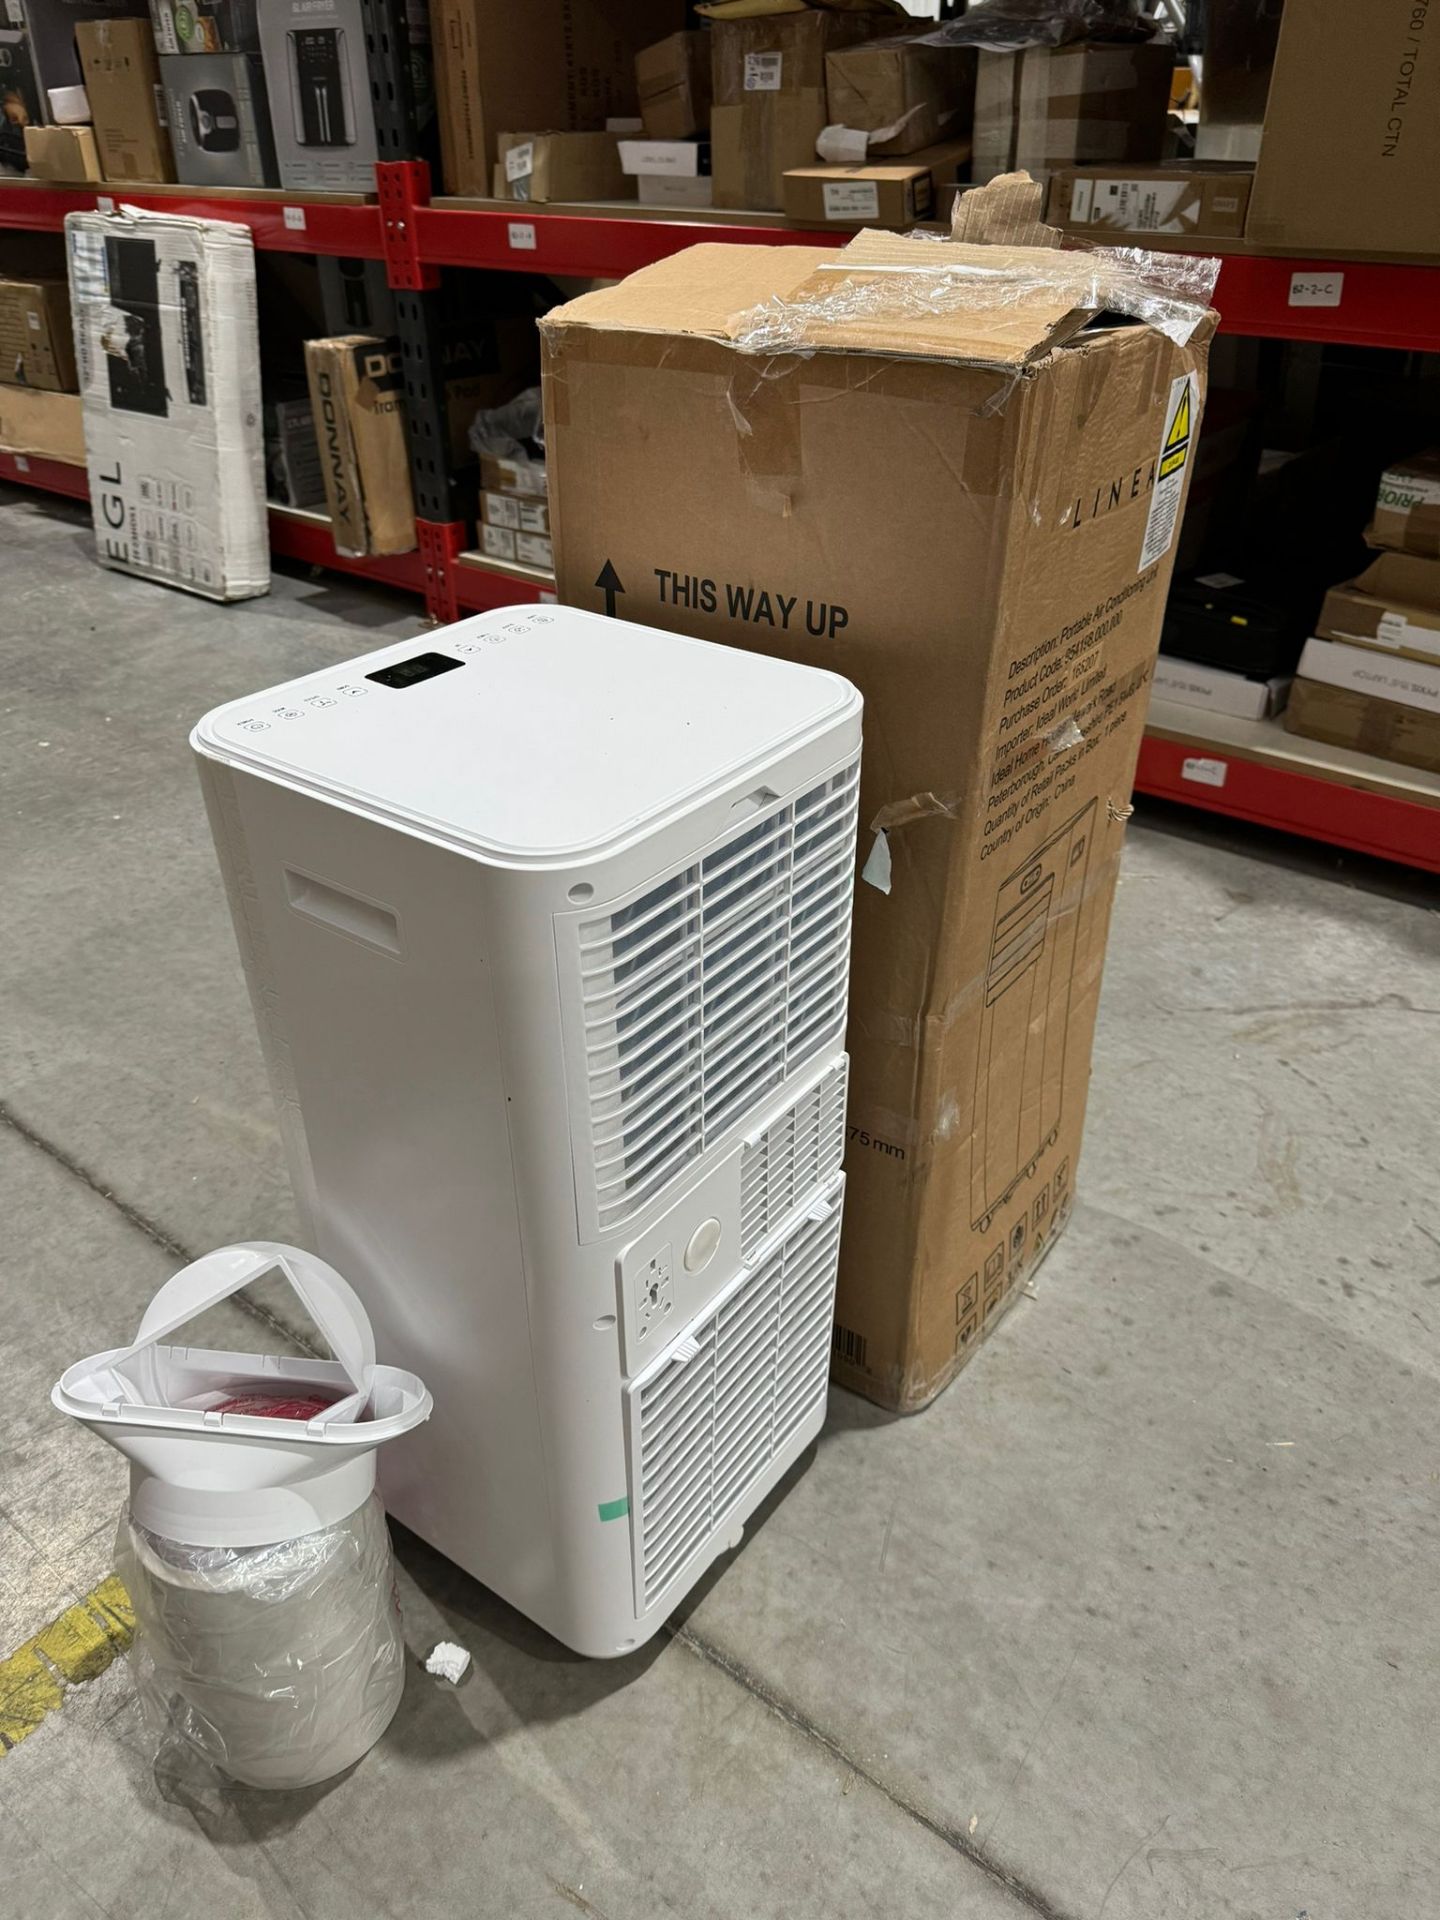 1 x LINEA Portable Air Conditioning Unit - 954198.000.000 with Window Kit - NO RESERVE - Image 2 of 8